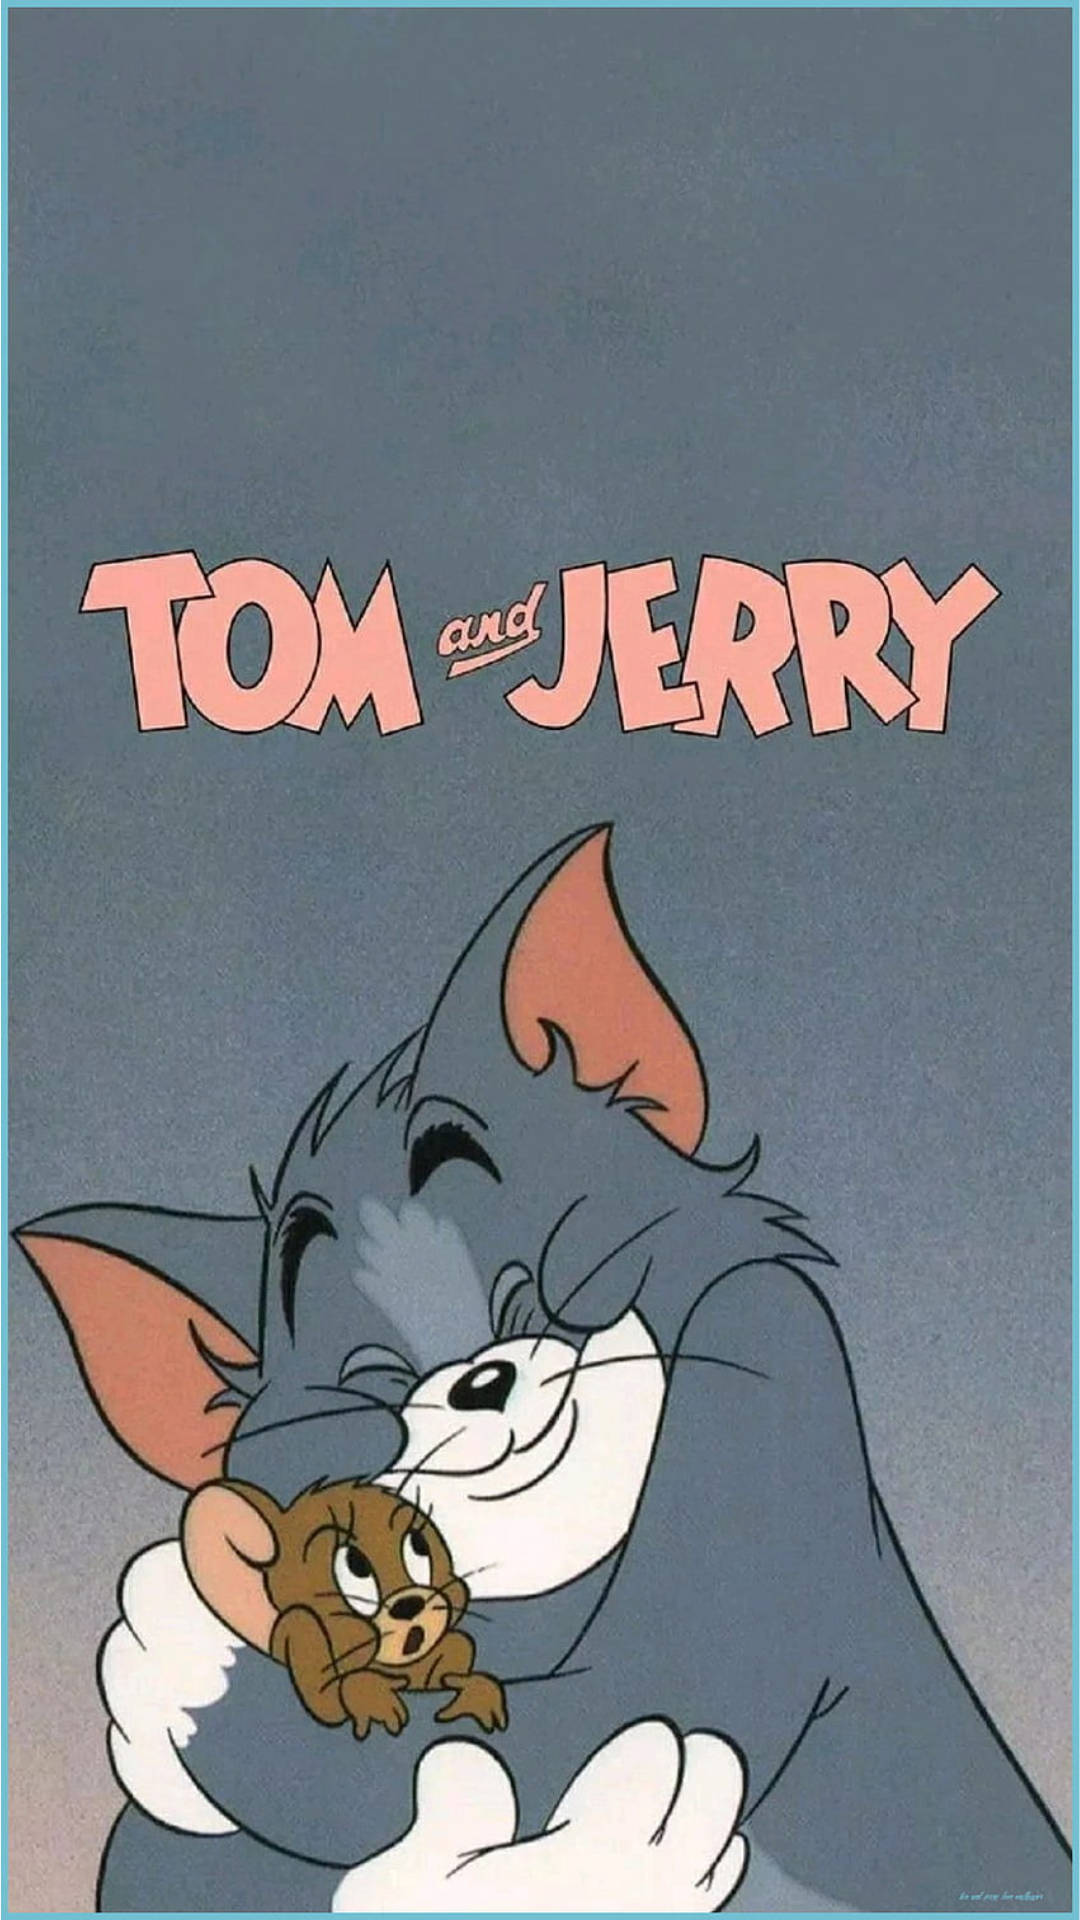 A poster for tom and jerry - Tom and Jerry